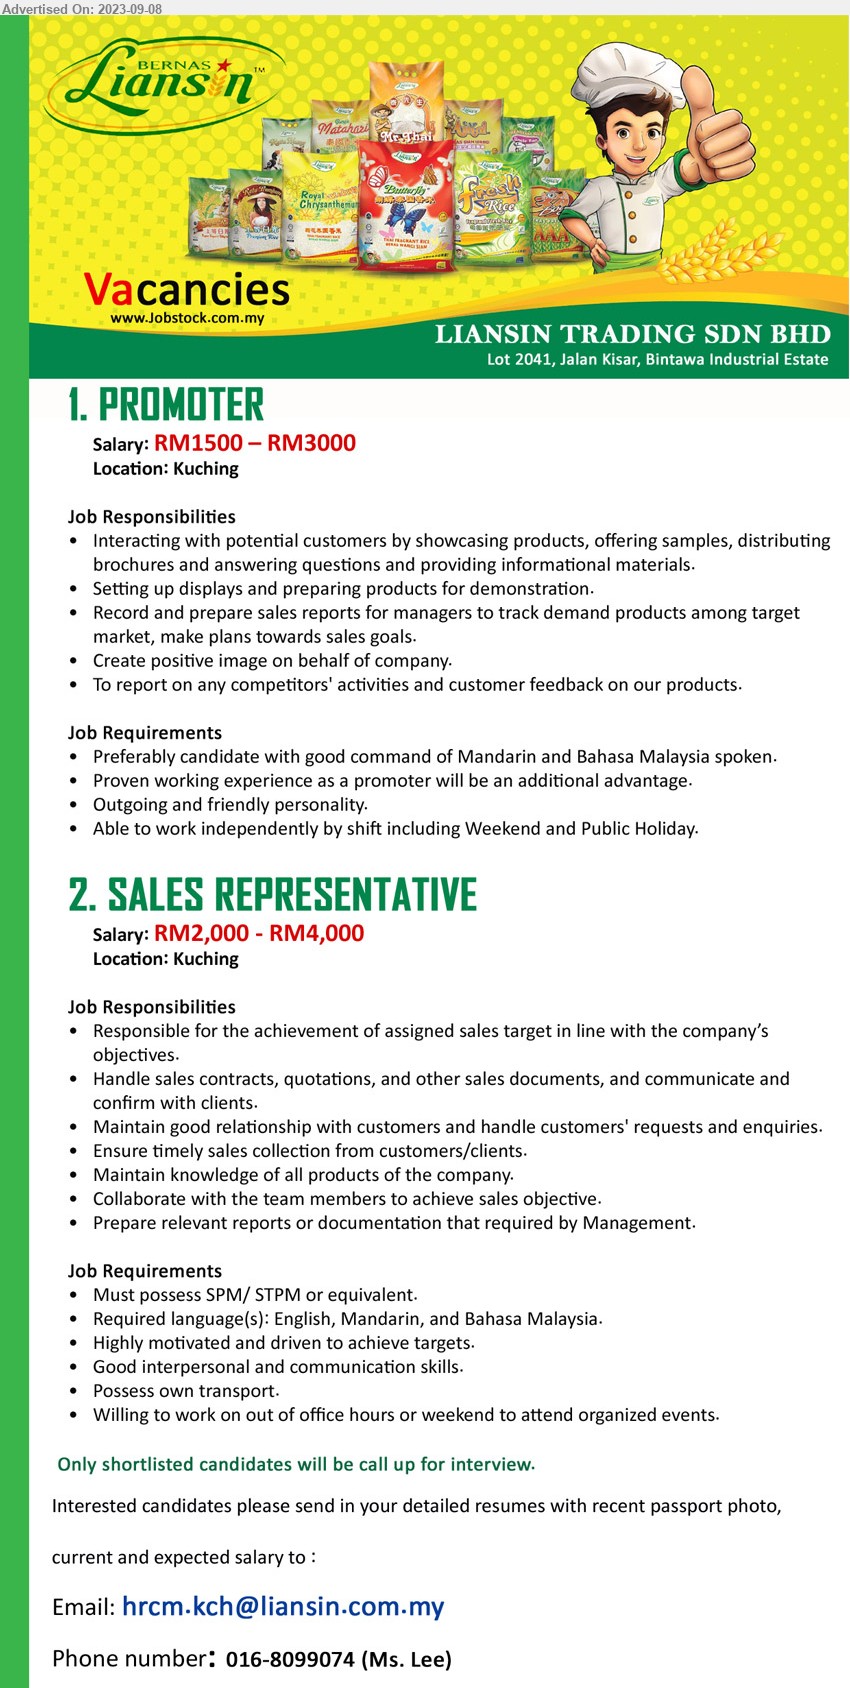 LIANSIN TRADING SDN BHD - 1. PROMOTER  (Kuching), Salary: RM1500 – RM3000, referably candidate with good command of Mandarin and Bahasa Malaysia spoken....
2. SALES REPRESENTATIVE (Kuching), Salary: RM2,000 - RM4,000, SPM/ STPM, required language(s): English, Mandarin, and Bahasa Malaysia.,...
Call 016-8099074 / Email resume to ...